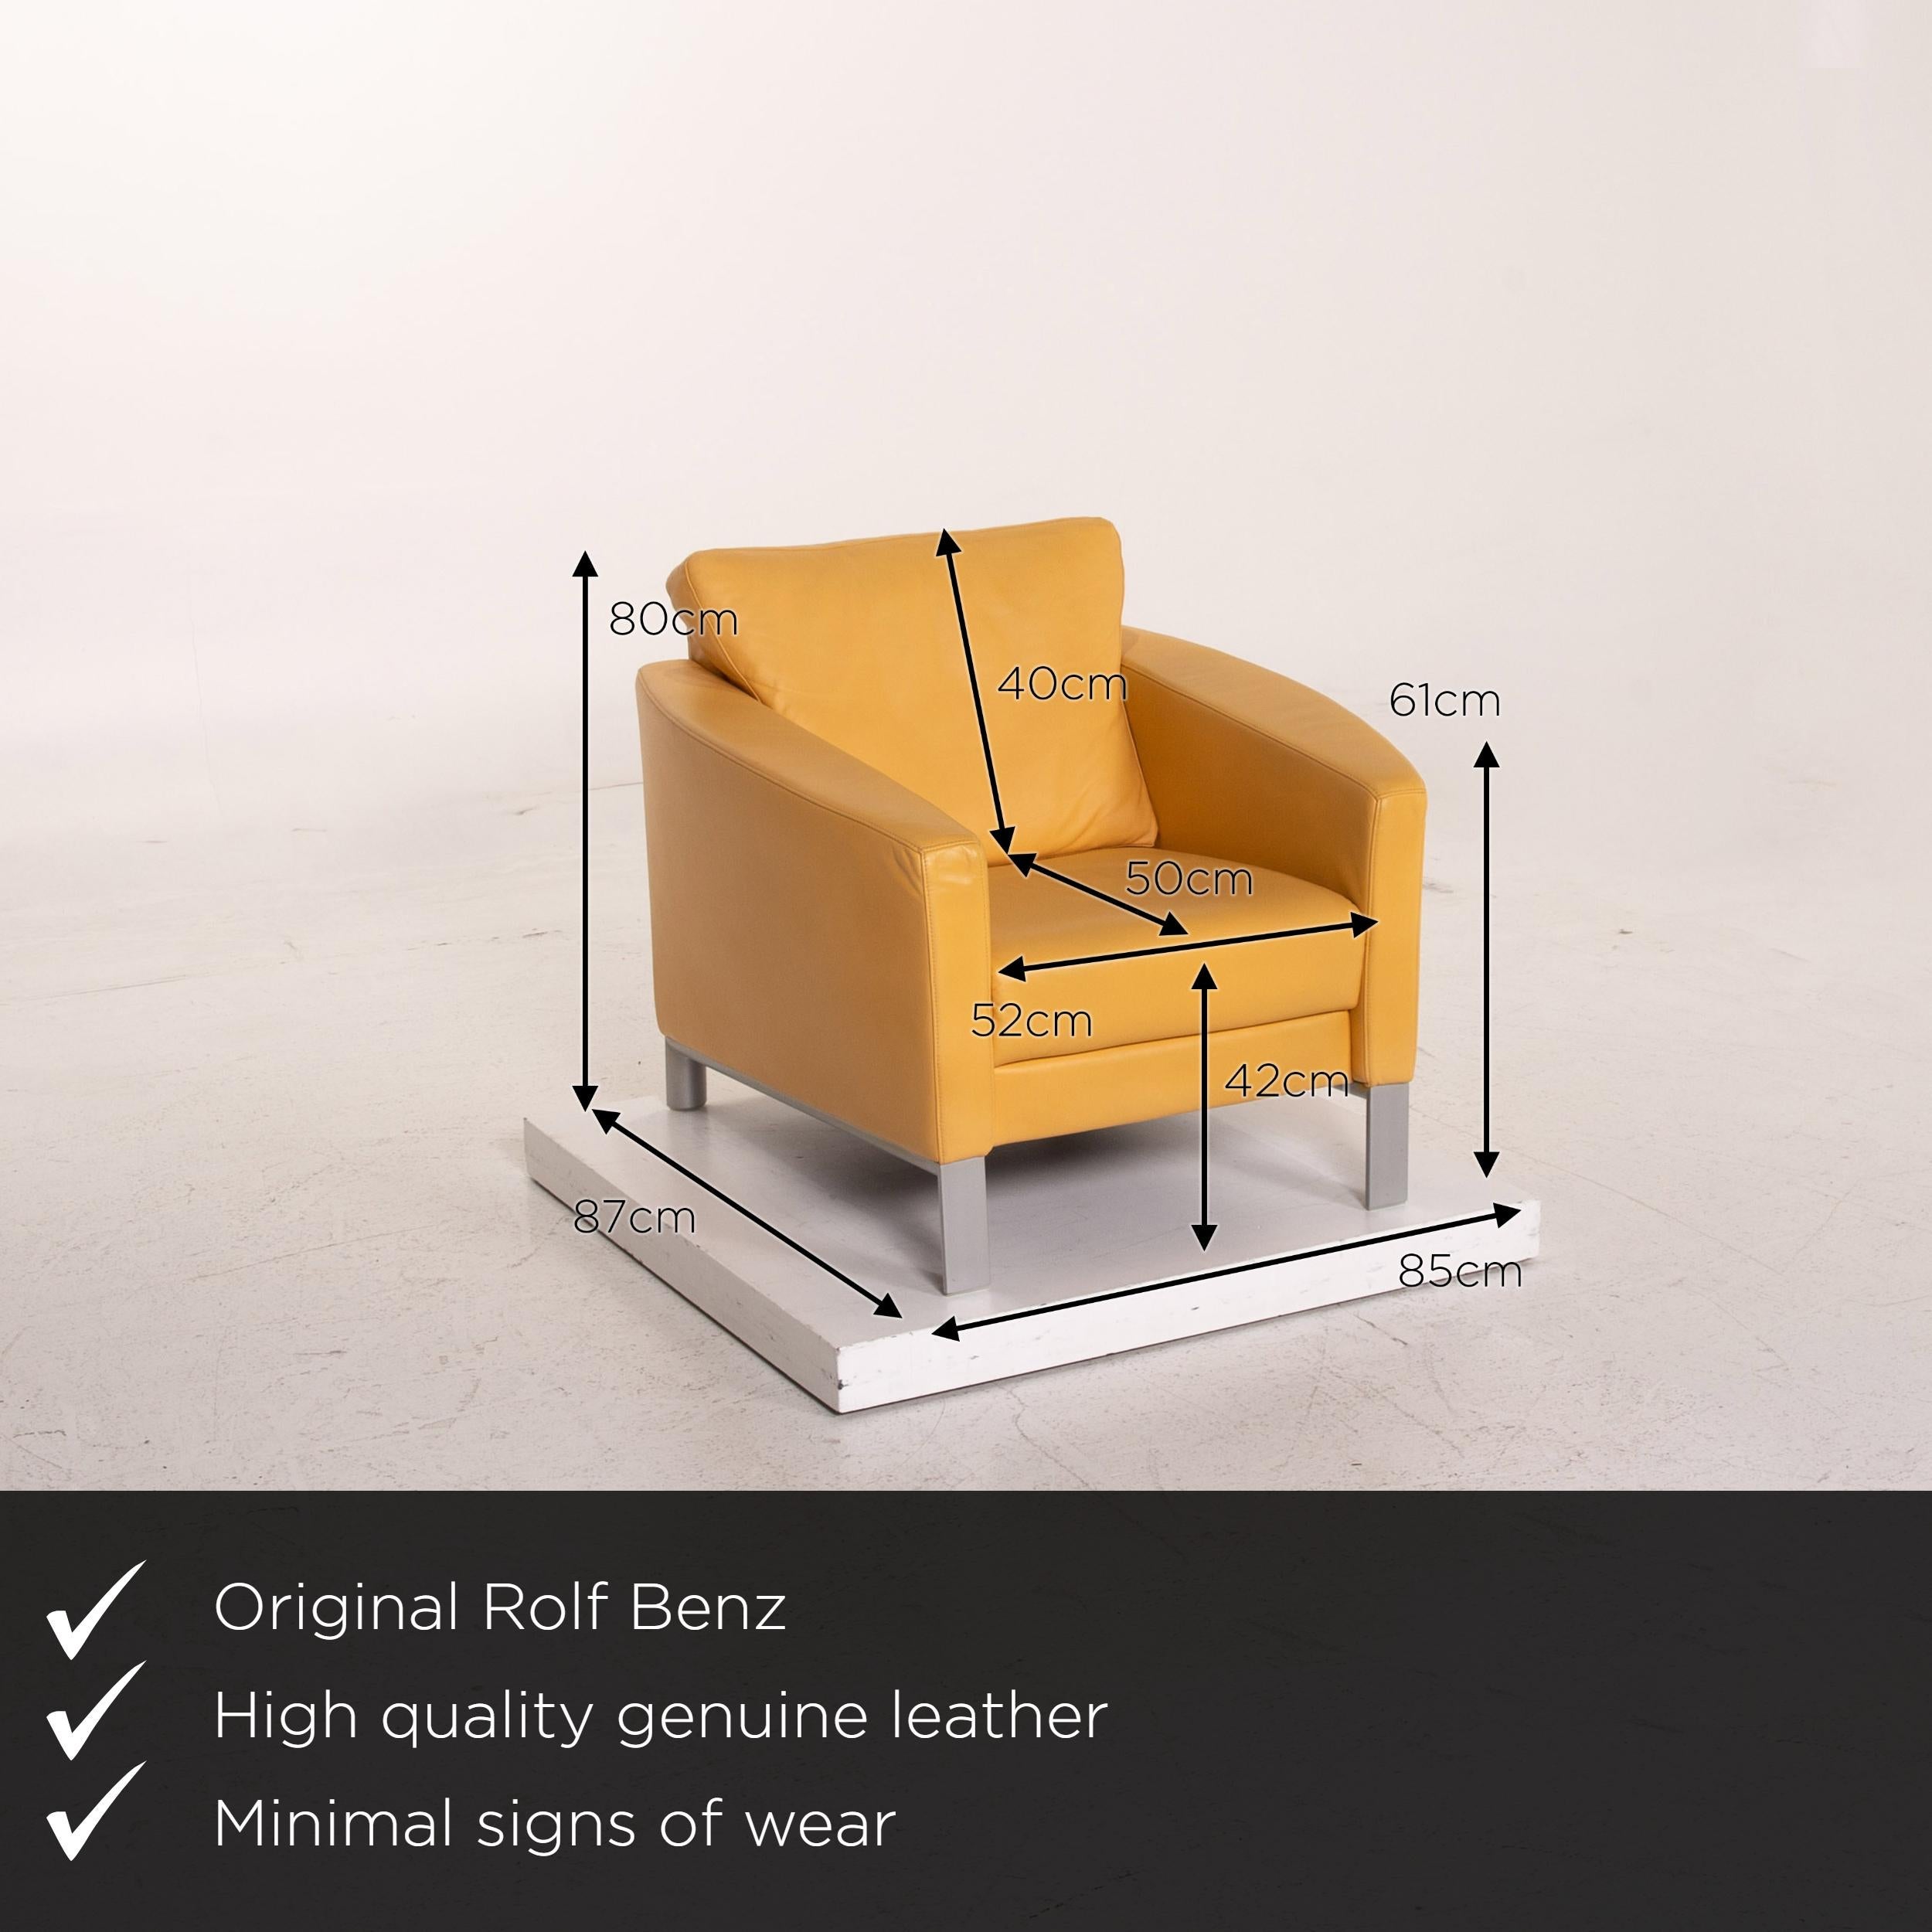 We present to you a Rolf Benz leather armchair yellow.

Product measurements in centimeters:

Depth 87
Width 85
Height 80
Seat height 42
Rest height 61
Seat depth 50
Seat width 52
Back height 40.
 
 
  